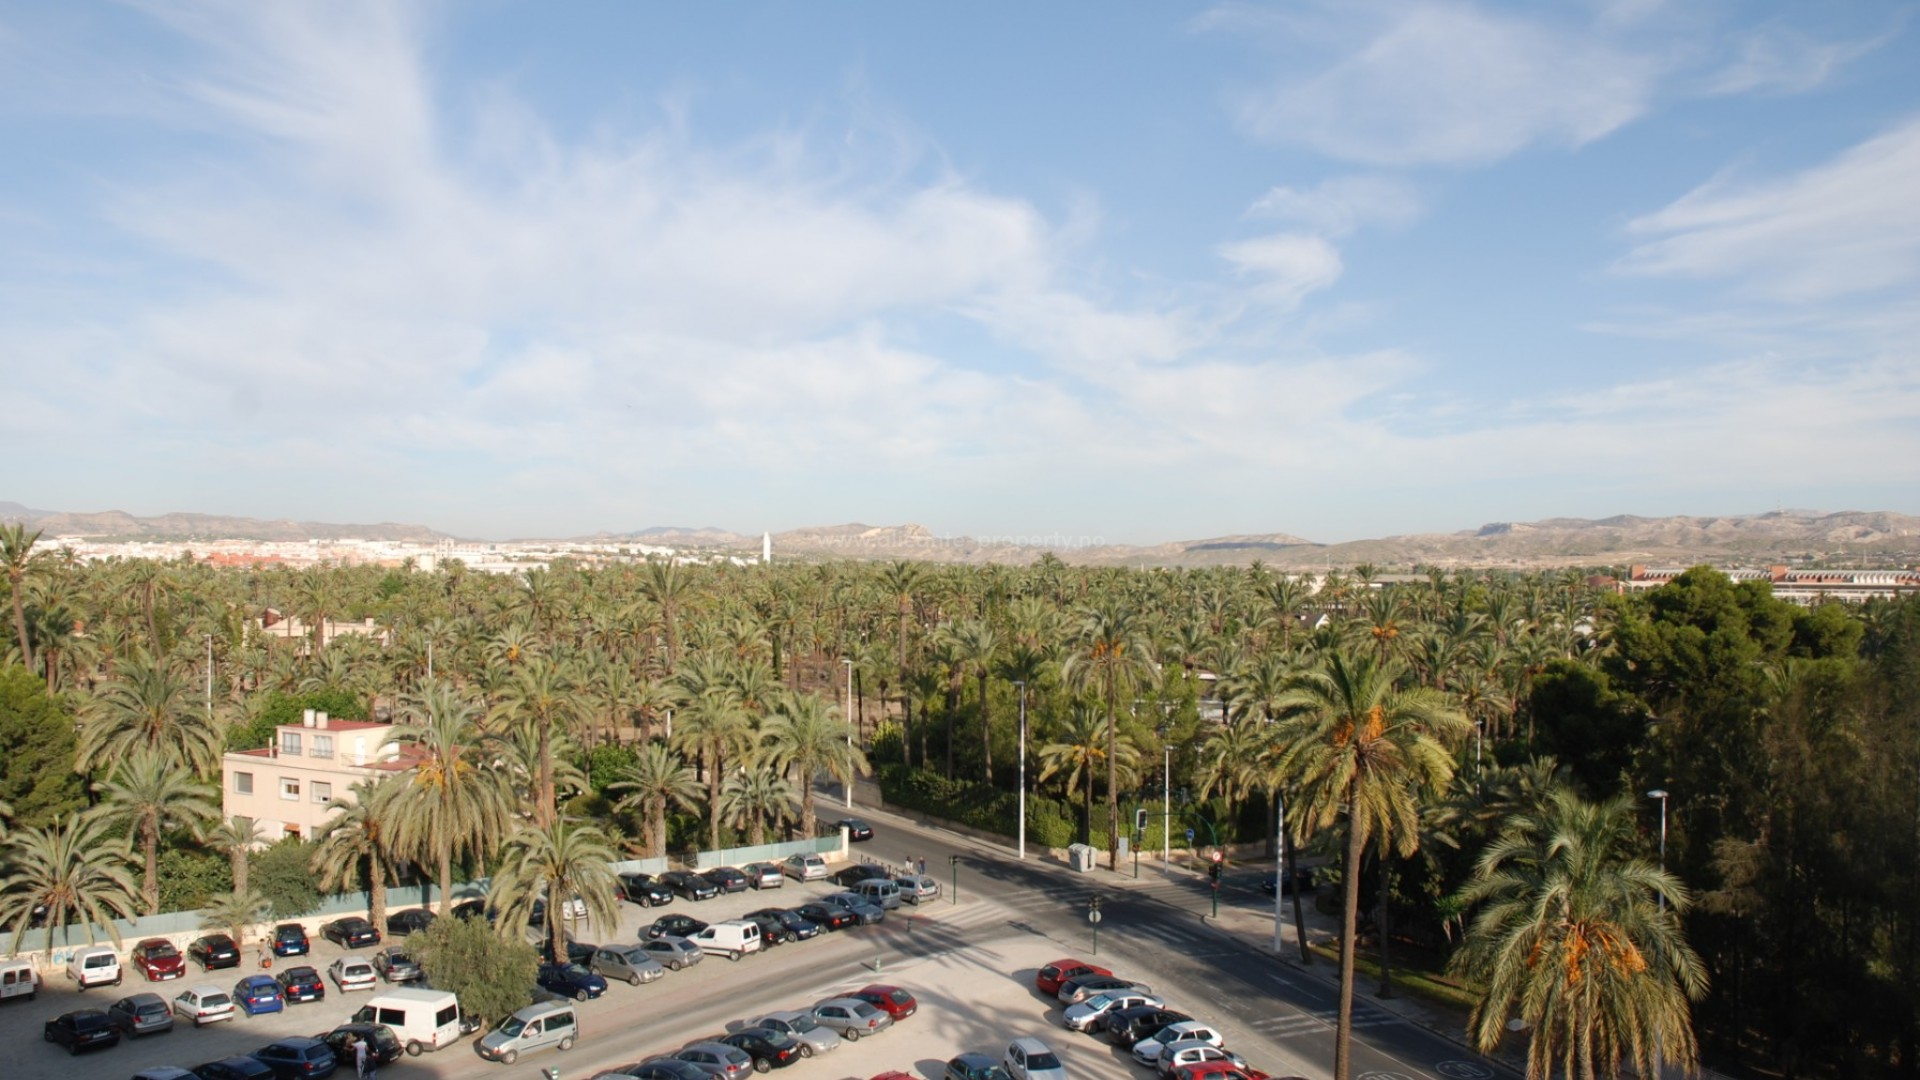 Apartments/flats in the center of Elche city - different sizes with 4, 3 and 2 bedrooms